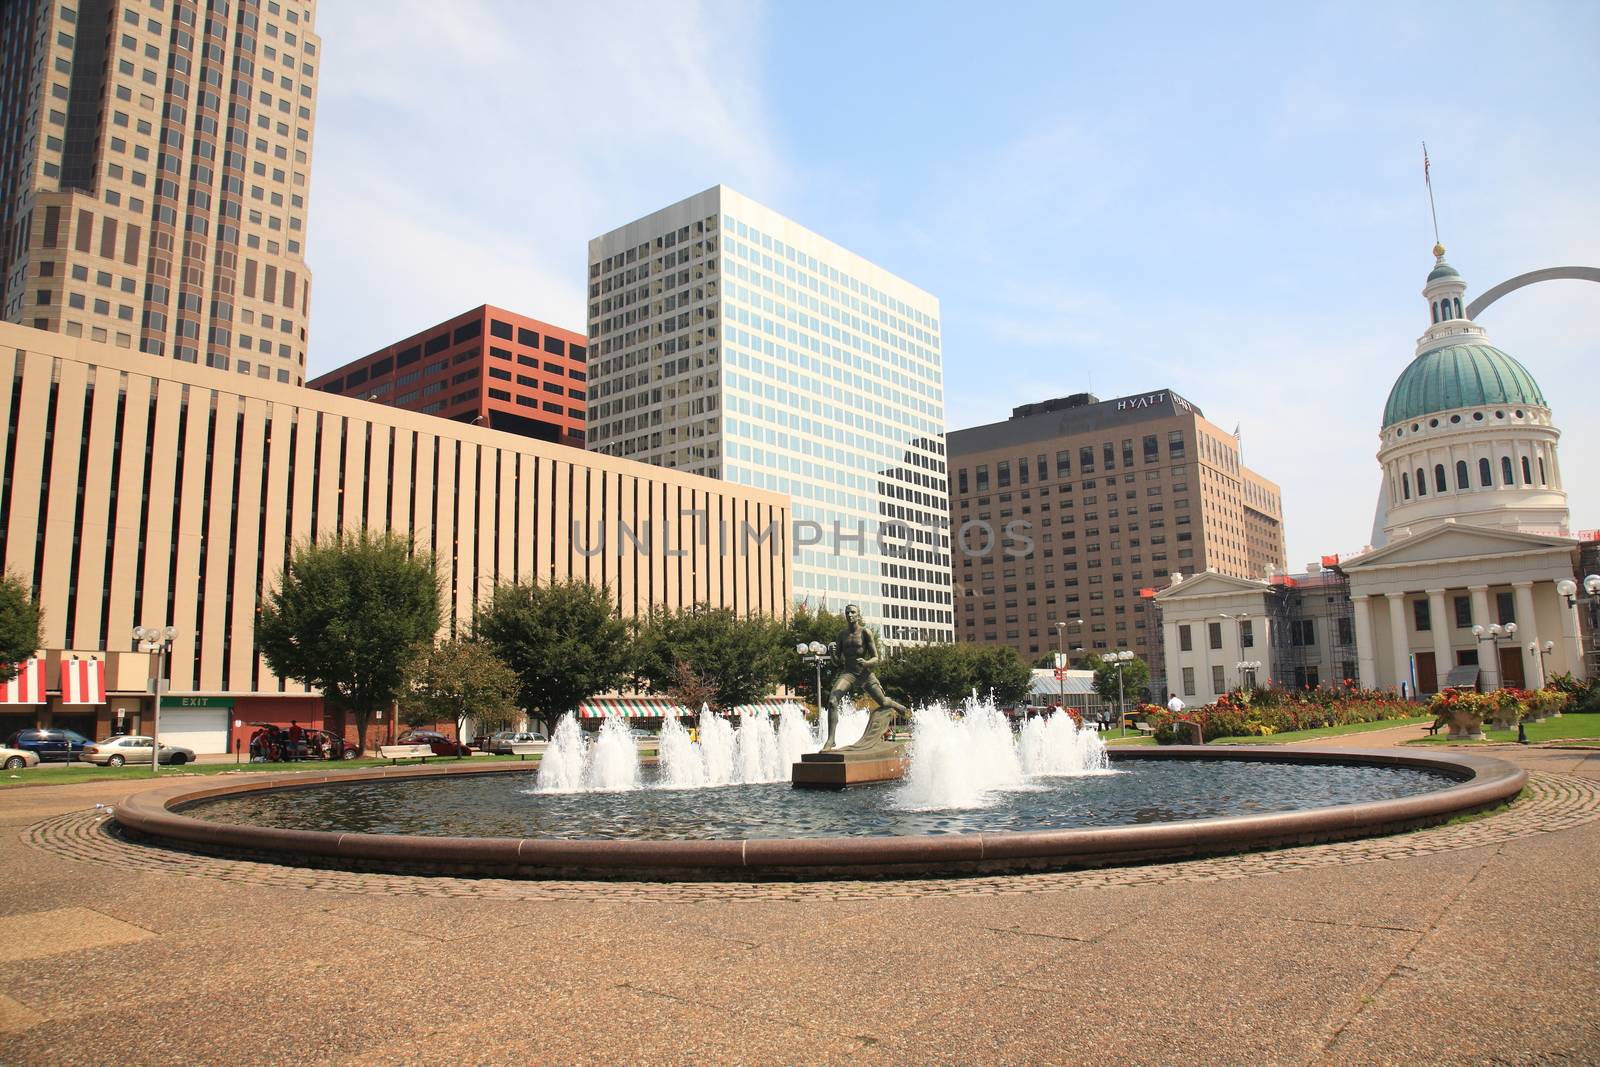 The Running Man Statue in Kiener Plaza St. Louis Gateway Mall near the famous Arch and Old Courthouse.